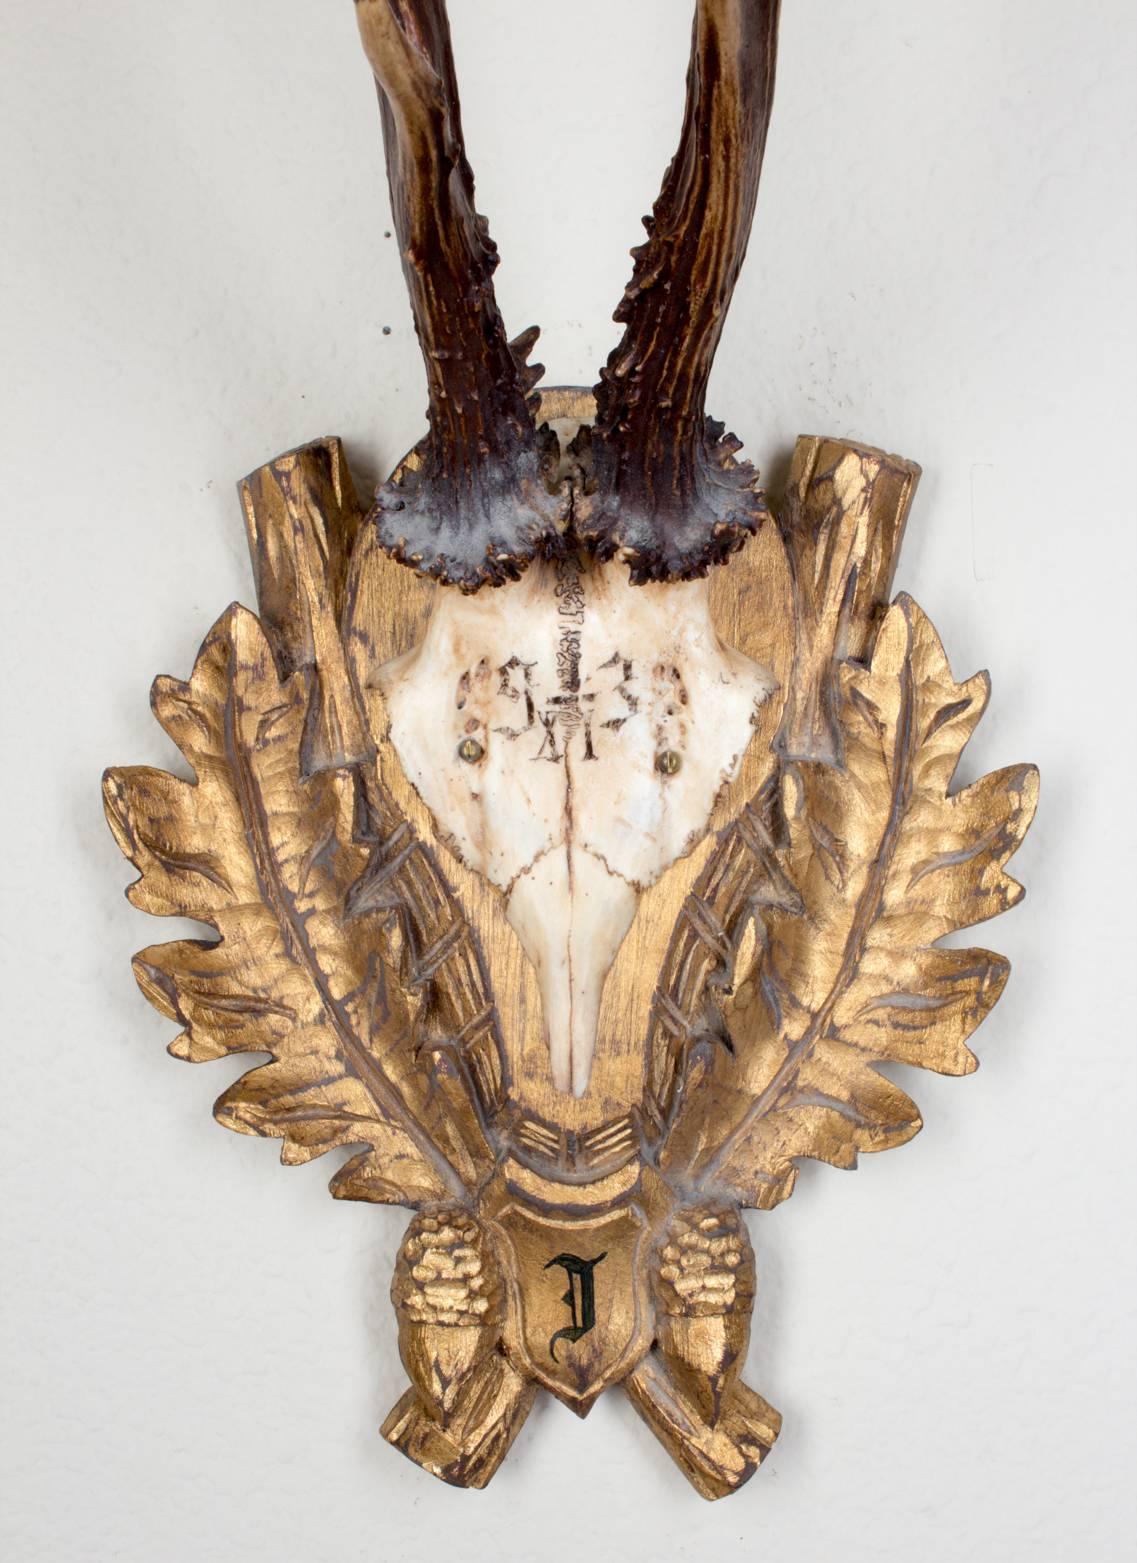 19th century Roe Deer trophy believed to have been taken by Emperor Franz Josef during his time at the Kaiservilla, the summer palace of the great Austro-Hungarian monarchy in the small village of Bad Ischl, Austria. Original plaque and initial 